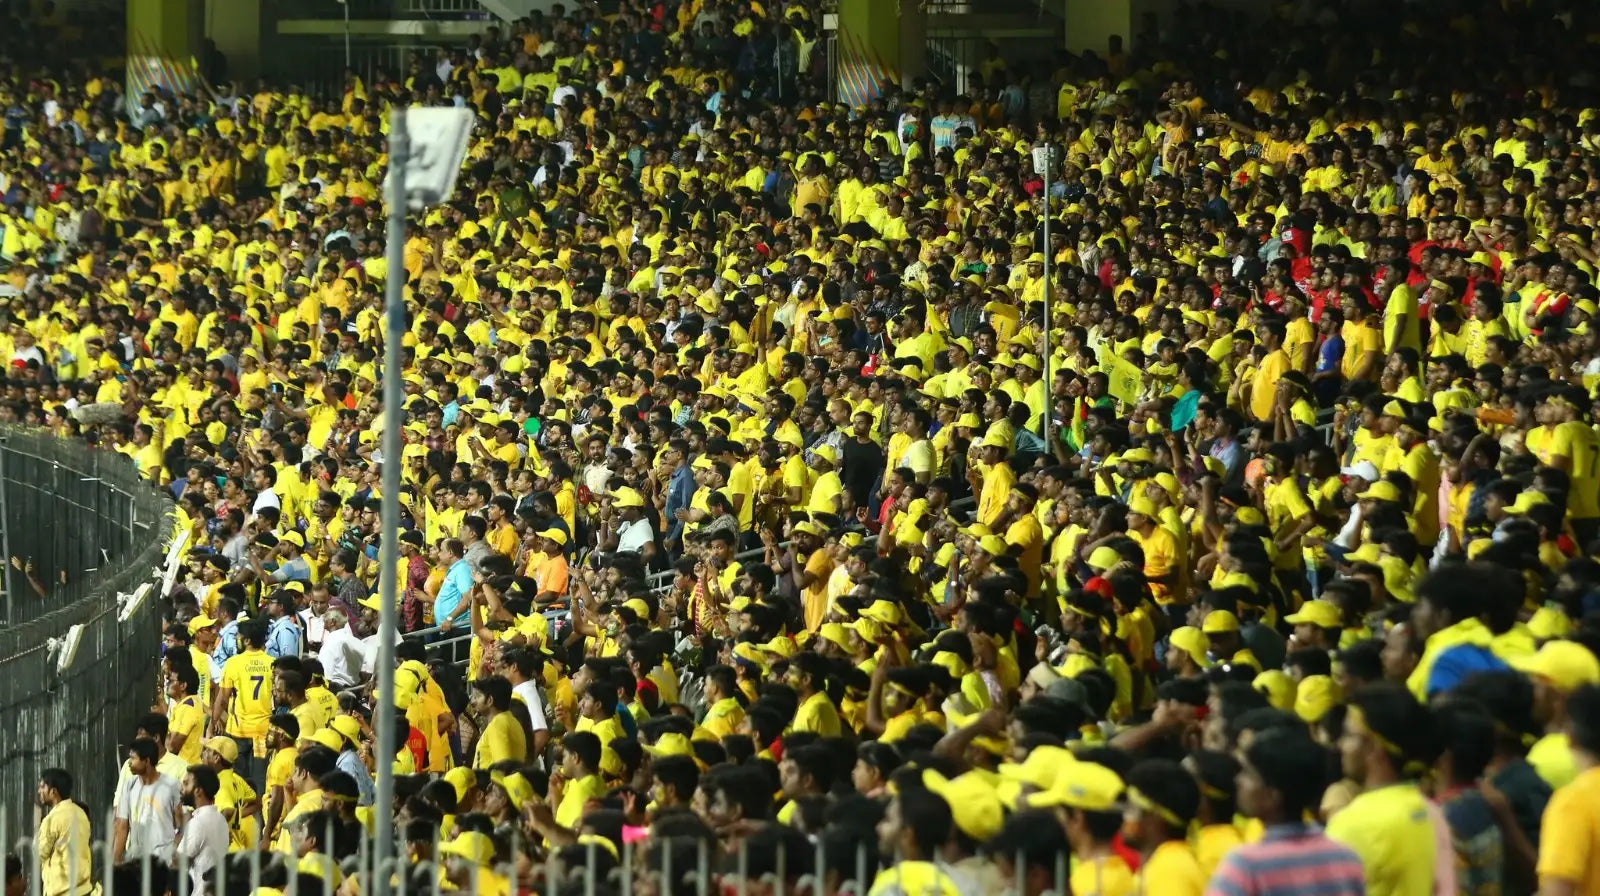 The stadium stands have turned yellow with fans wearing the yellow CSK jersey